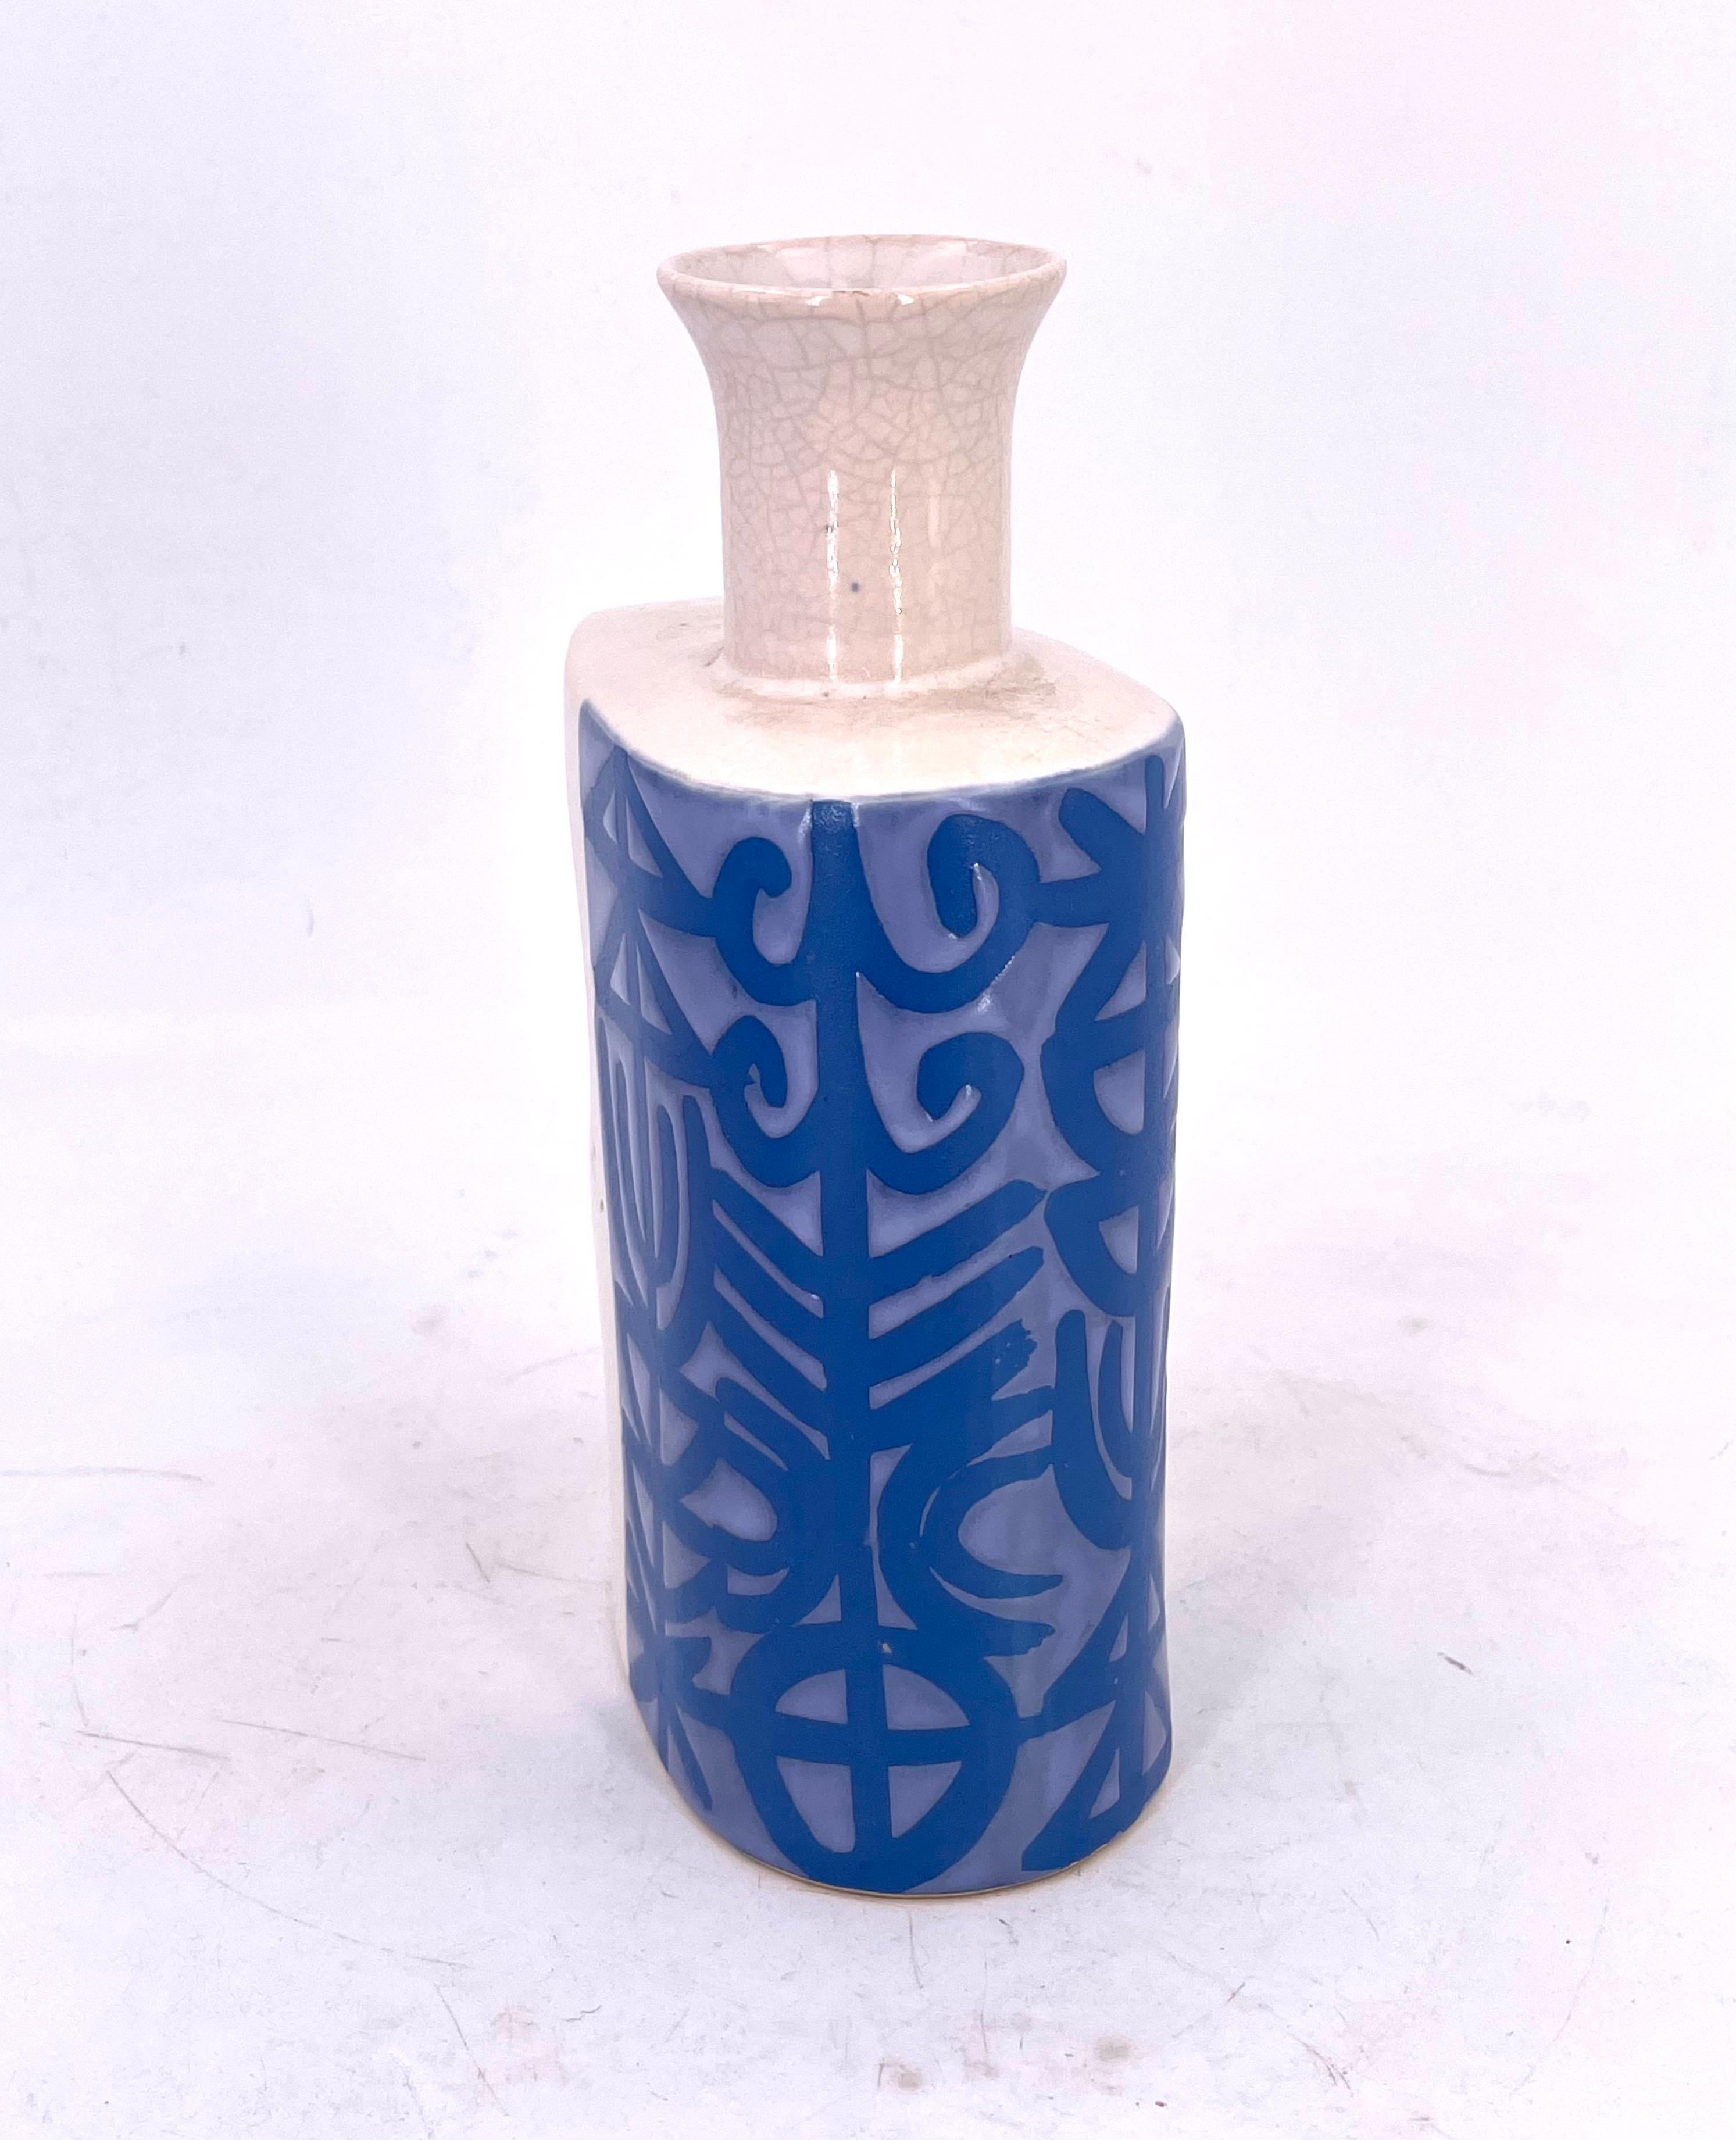 Beautiful ceramic vase with blue designs motifs, circa 1980s residual of label Made in Japan no chips or cracks.